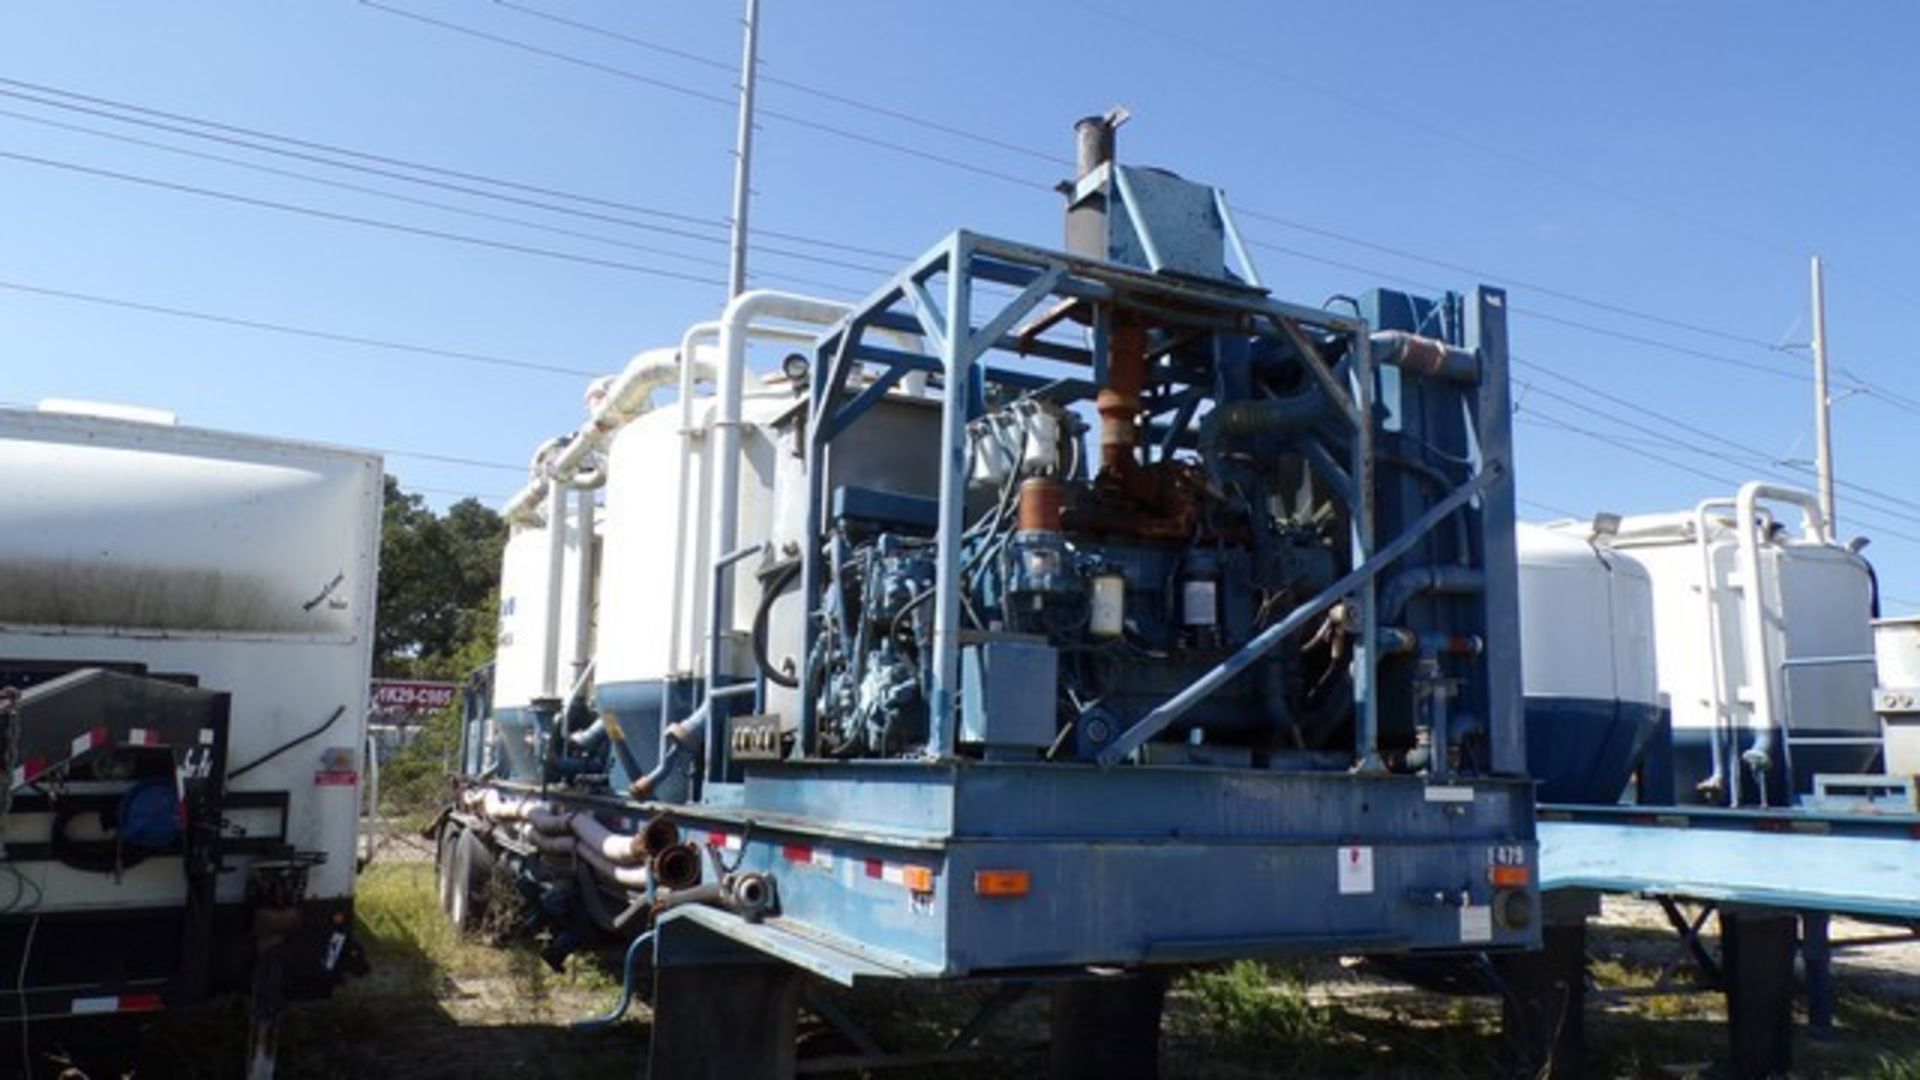 Located in YARD 19 - Wixon Valley, TX (CBF011) (X) 2006 WILCO FAB T/A 2 POD BULK CHEM MIXING - Image 2 of 2